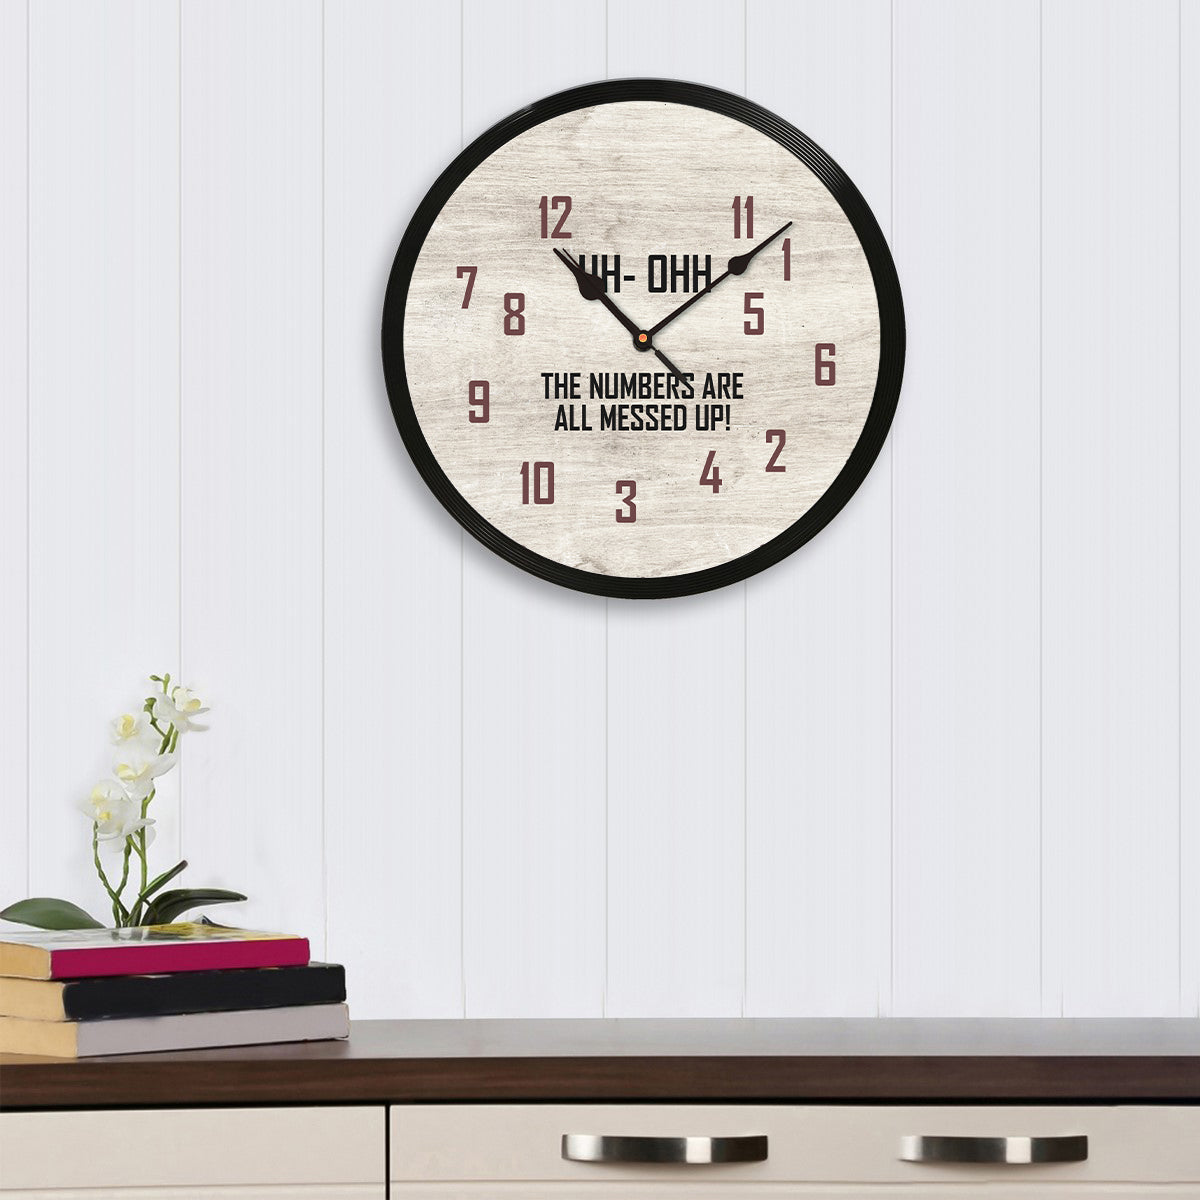 "The Numbers Are Messed Up" Designer Round Analog Black Wall Clock 1